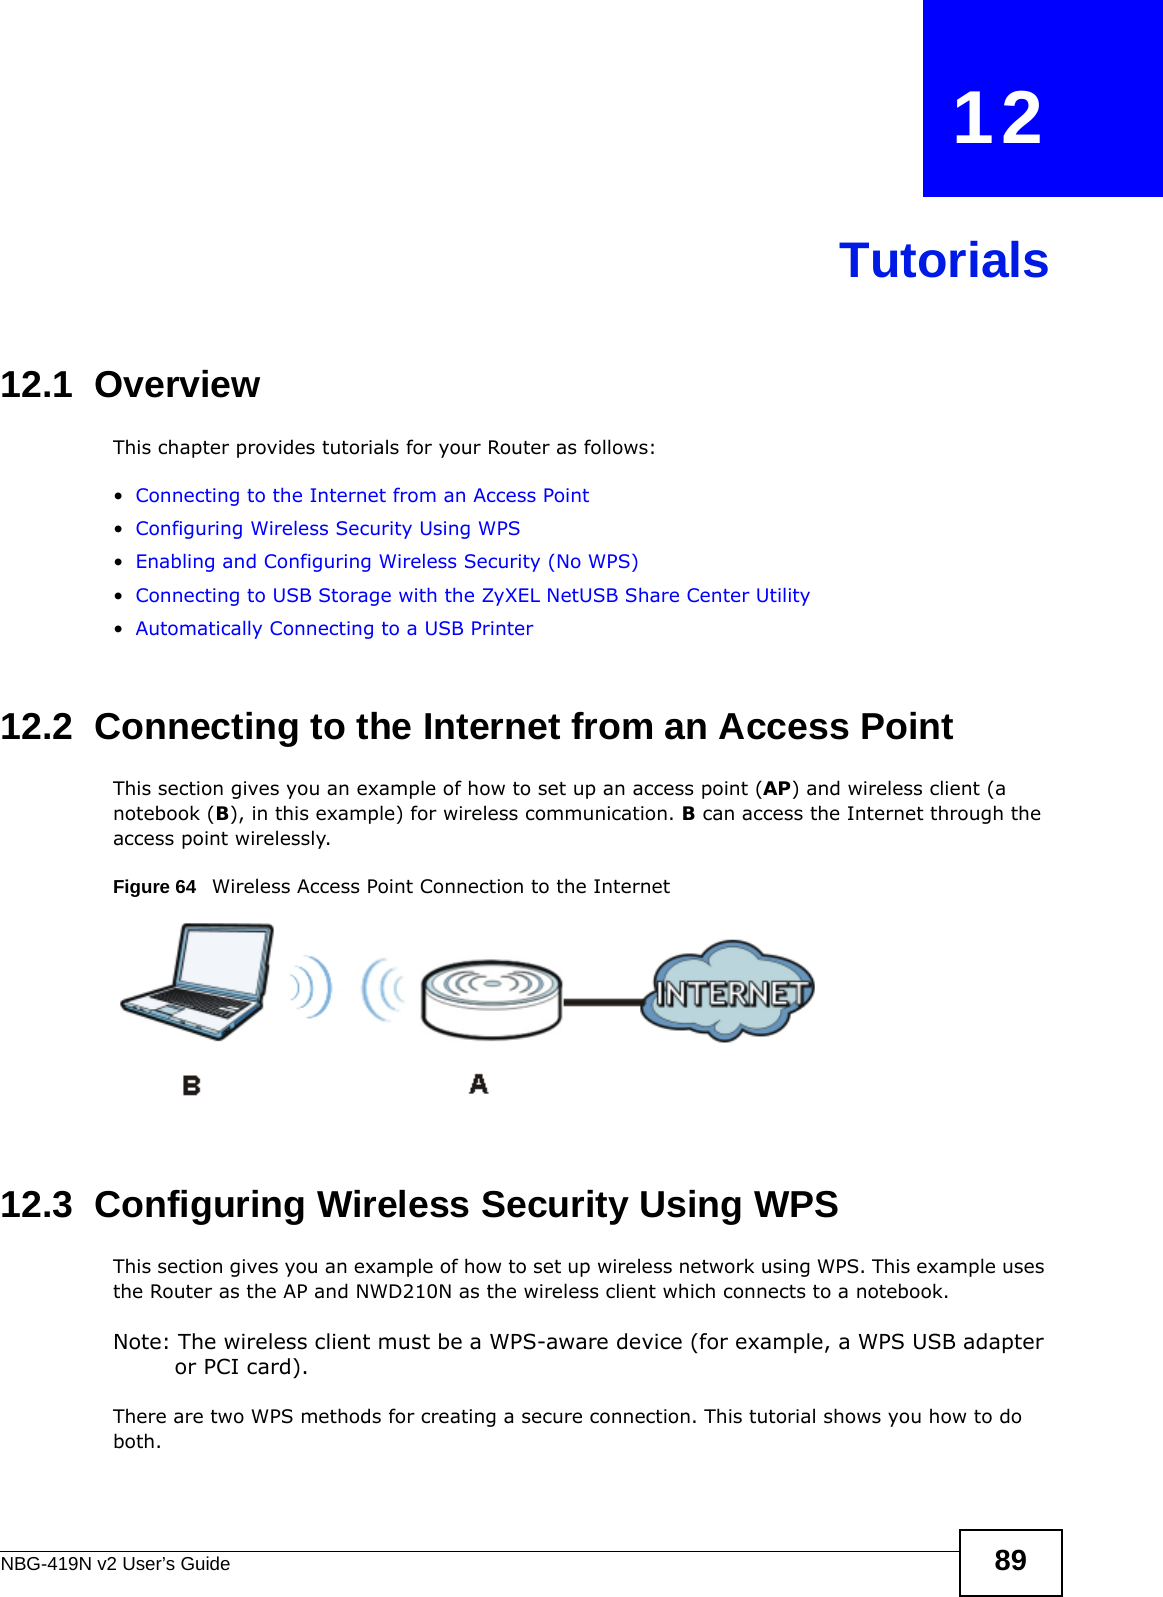 NBG-419N v2 User’s Guide 89CHAPTER   12Tutorials12.1  OverviewThis chapter provides tutorials for your Router as follows:•Connecting to the Internet from an Access Point•Configuring Wireless Security Using WPS•Enabling and Configuring Wireless Security (No WPS)•Connecting to USB Storage with the ZyXEL NetUSB Share Center Utility•Automatically Connecting to a USB Printer12.2  Connecting to the Internet from an Access PointThis section gives you an example of how to set up an access point (AP) and wireless client (a notebook (B), in this example) for wireless communication. B can access the Internet through the access point wirelessly.Figure 64   Wireless Access Point Connection to the Internet12.3  Configuring Wireless Security Using WPSThis section gives you an example of how to set up wireless network using WPS. This example uses the Router as the AP and NWD210N as the wireless client which connects to a notebook. Note: The wireless client must be a WPS-aware device (for example, a WPS USB adapter or PCI card).There are two WPS methods for creating a secure connection. This tutorial shows you how to do both.